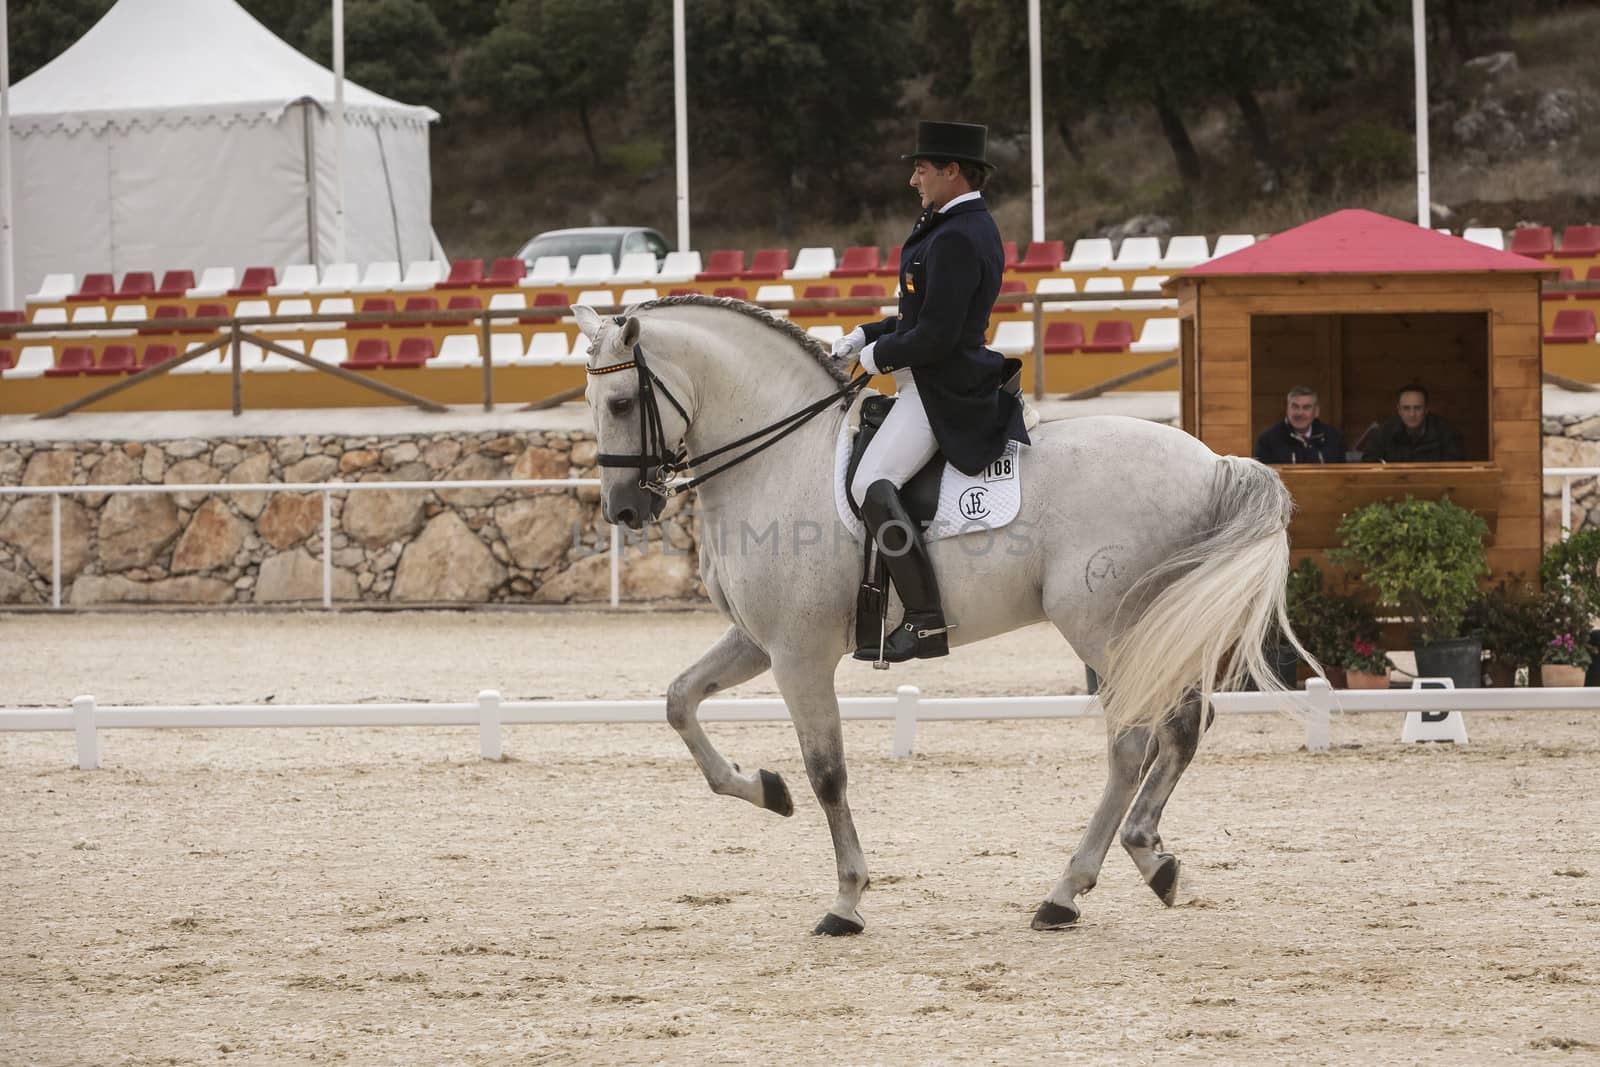 Valdepeñas de Jaen, Jaen province, SPAIN - 10 october 2008: Spanish purebred horse competing in dressage competition classic in La Beata, mounted by Spanish Olympic champion Jose manuel Muñoz,  Valdepeñas de jaen, Jaen province, Andalusia, Spain